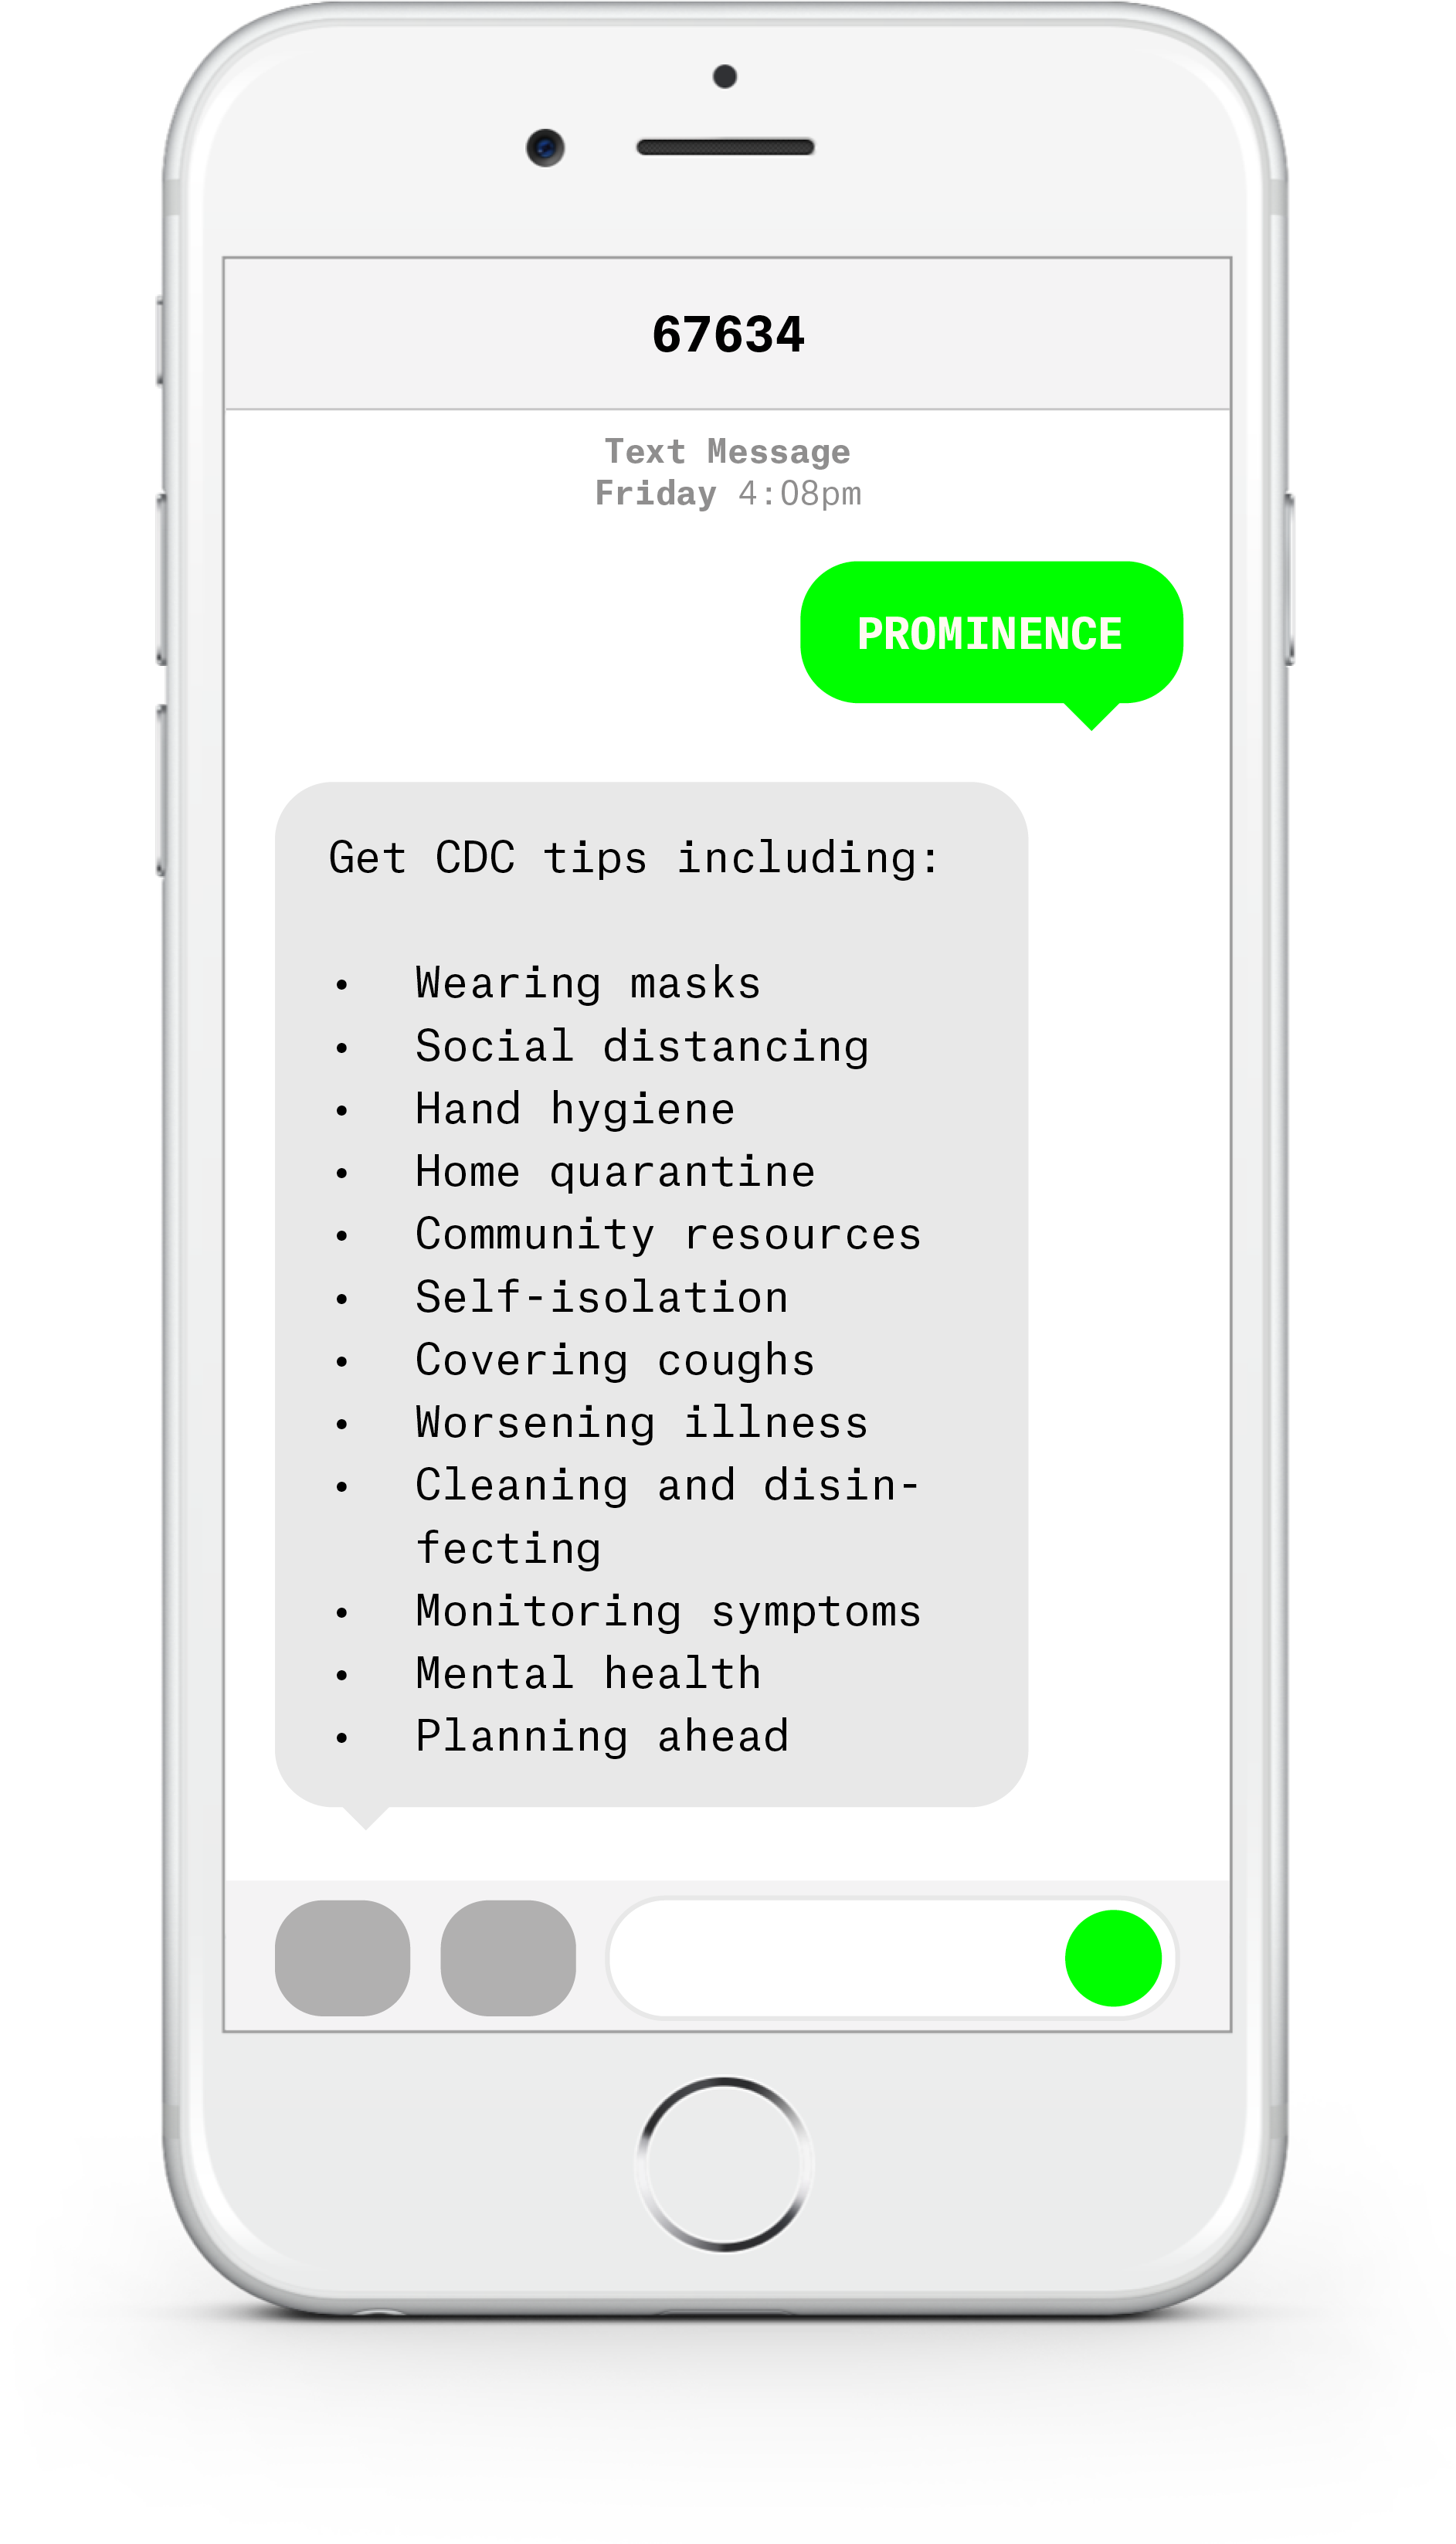 White iPhone with text messages about COVID-19 from Prominence Health Plan.